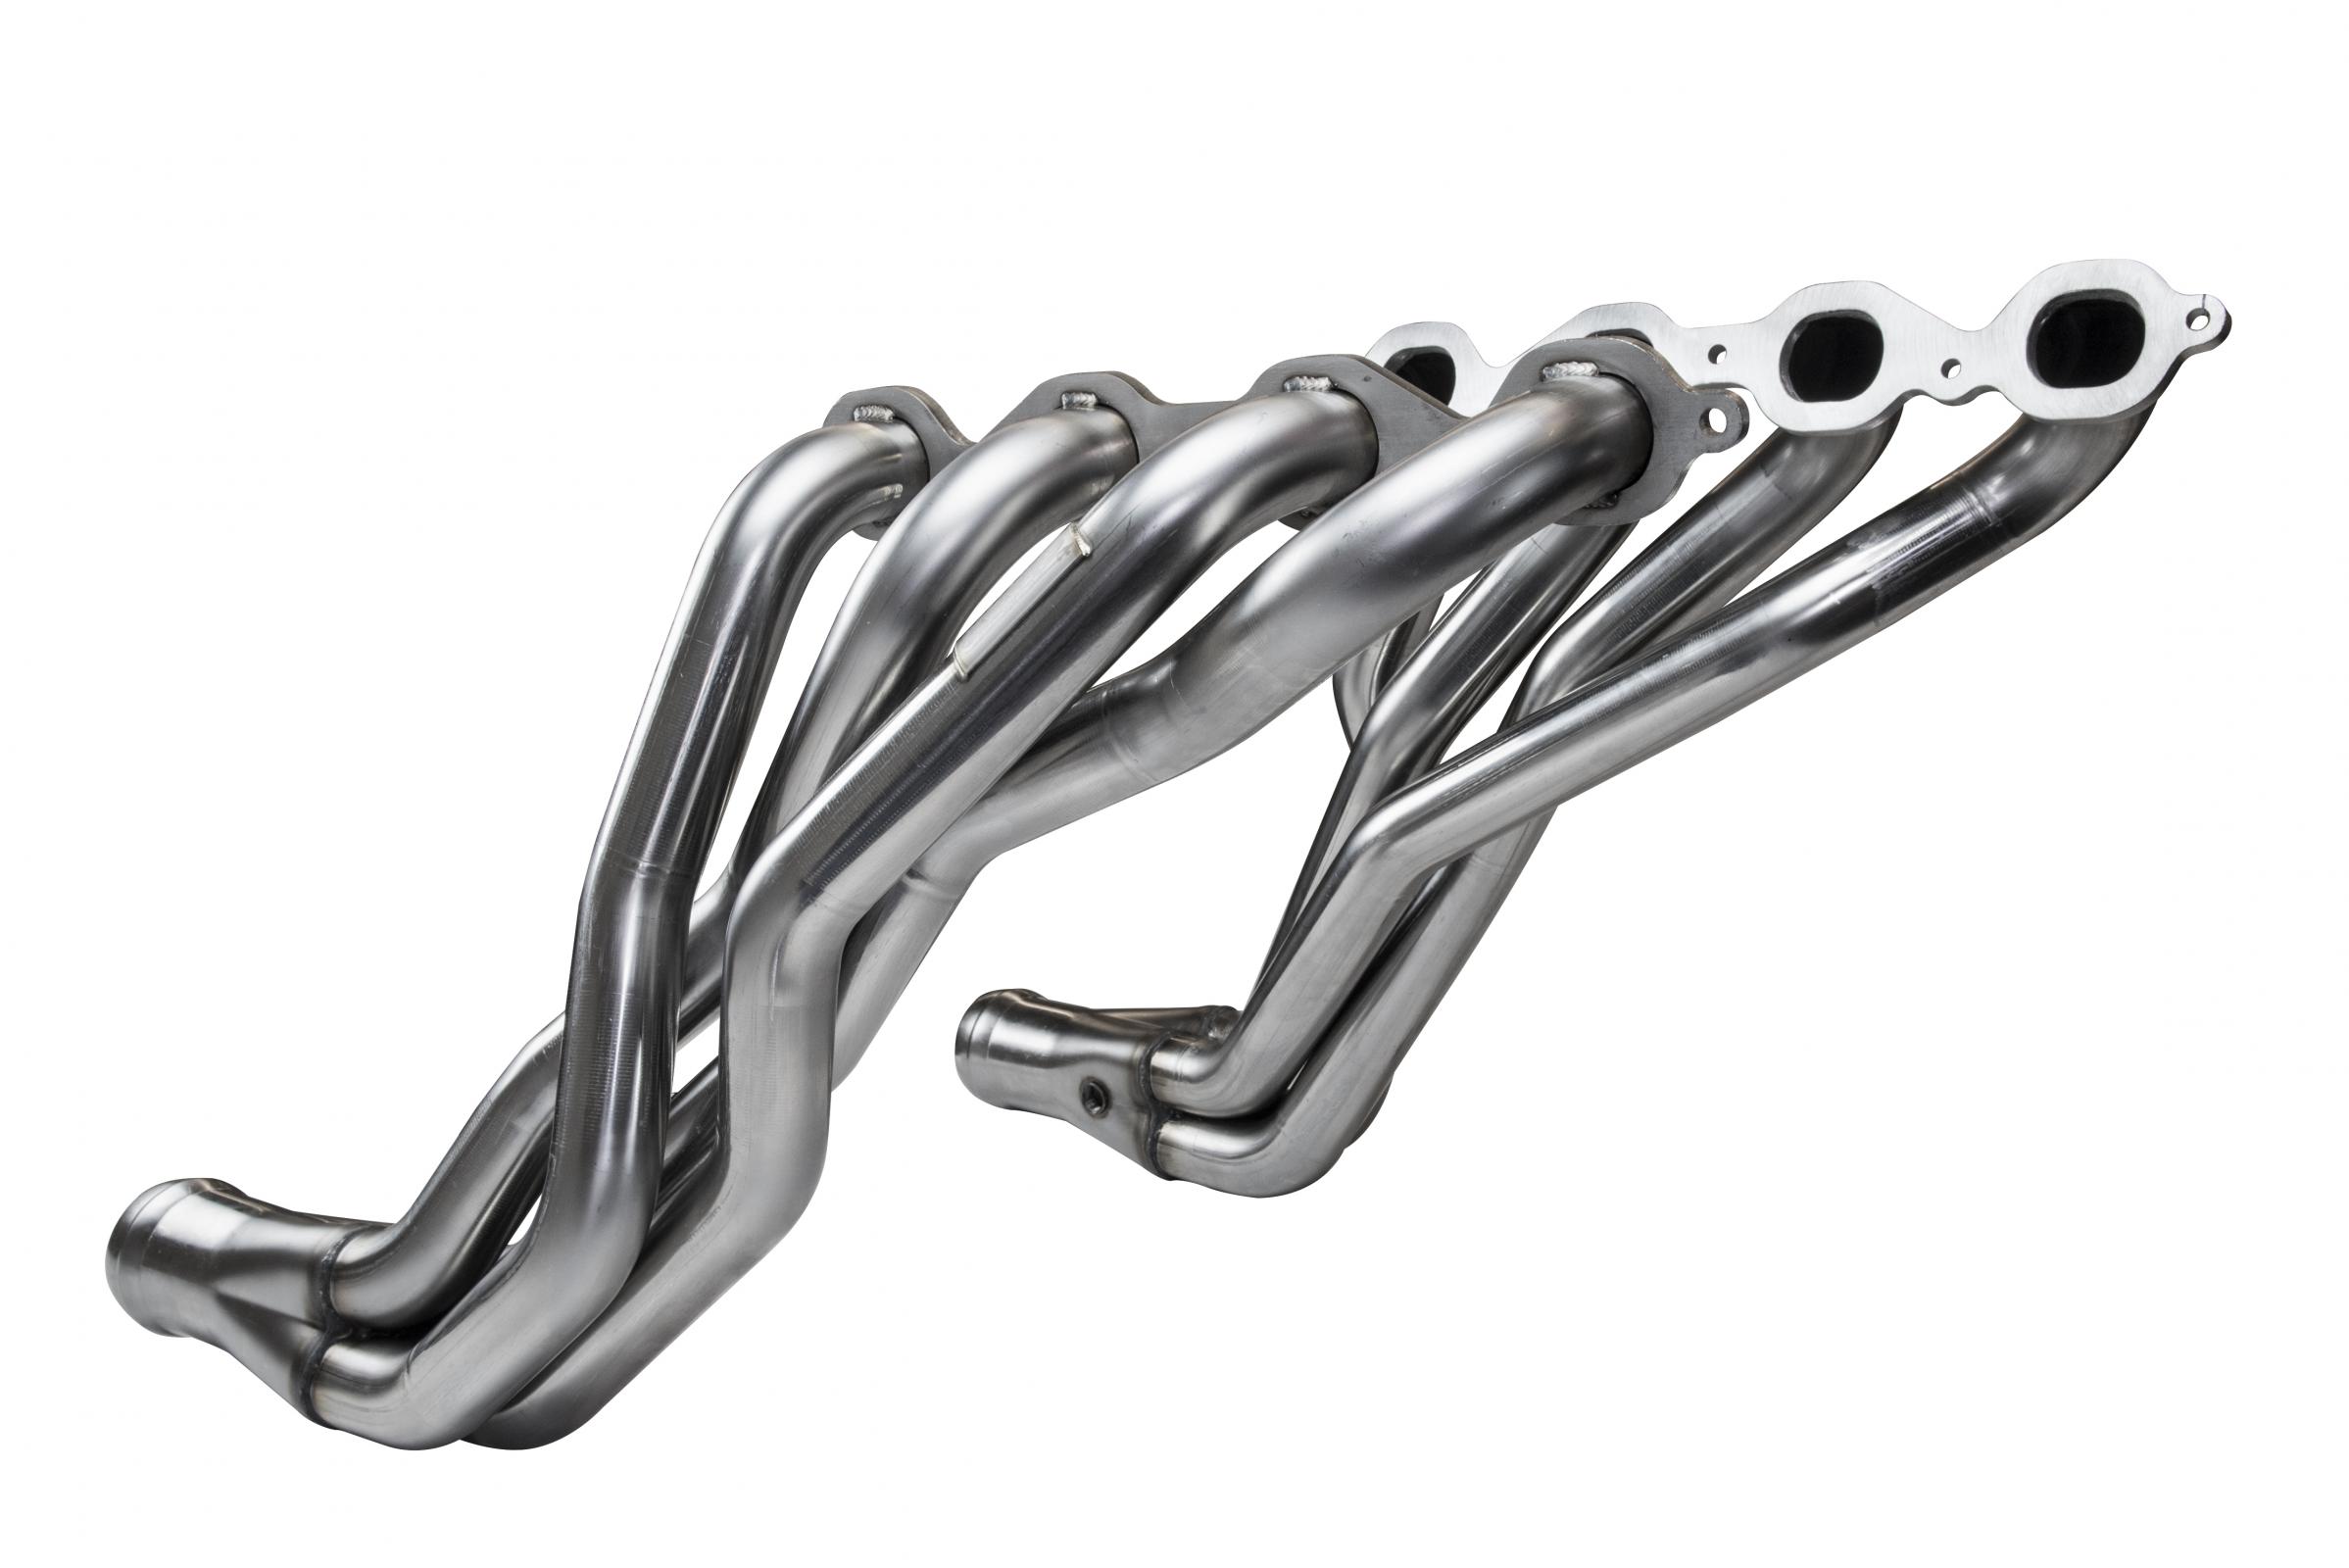 Stainless Steel Headers 1.875 x 3" Long Tube w/O2 Extension Harness Kit-2 Front/2 Back